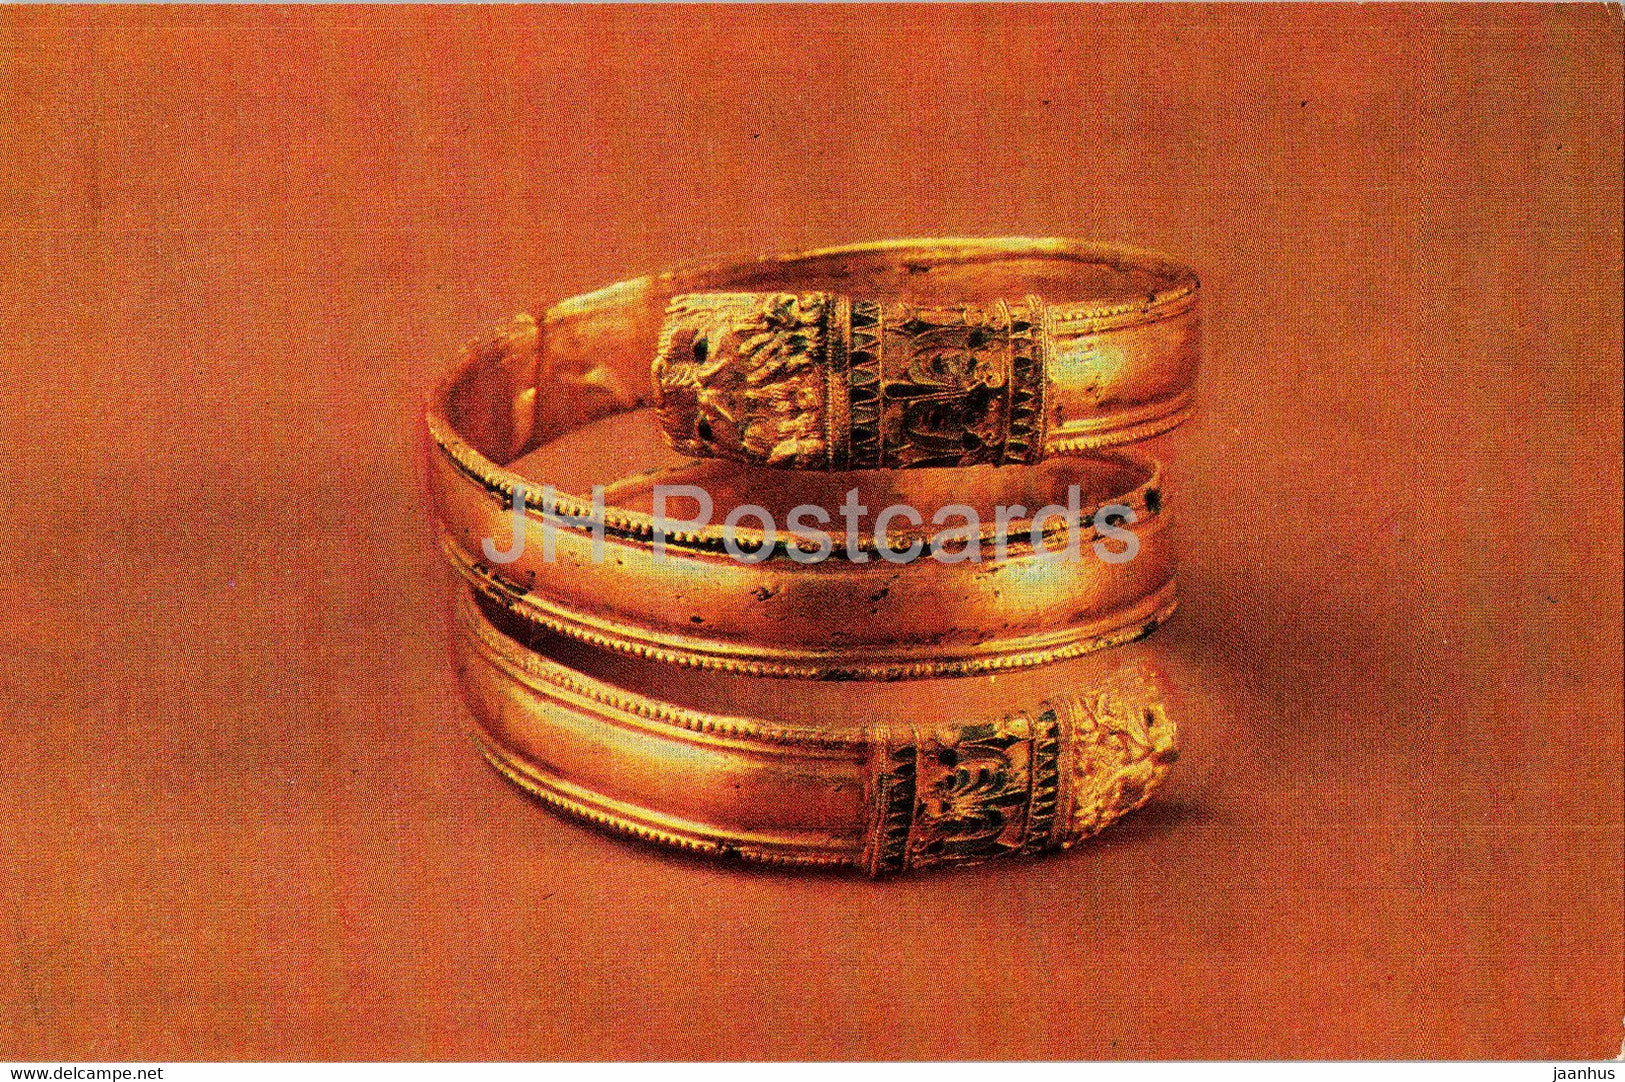 Spiral bracelet - Three Brothers burial - Goldwork of 6th-2nd centuries BC - Ancient Art - 1979 - Russia USSR - unused - JH Postcards